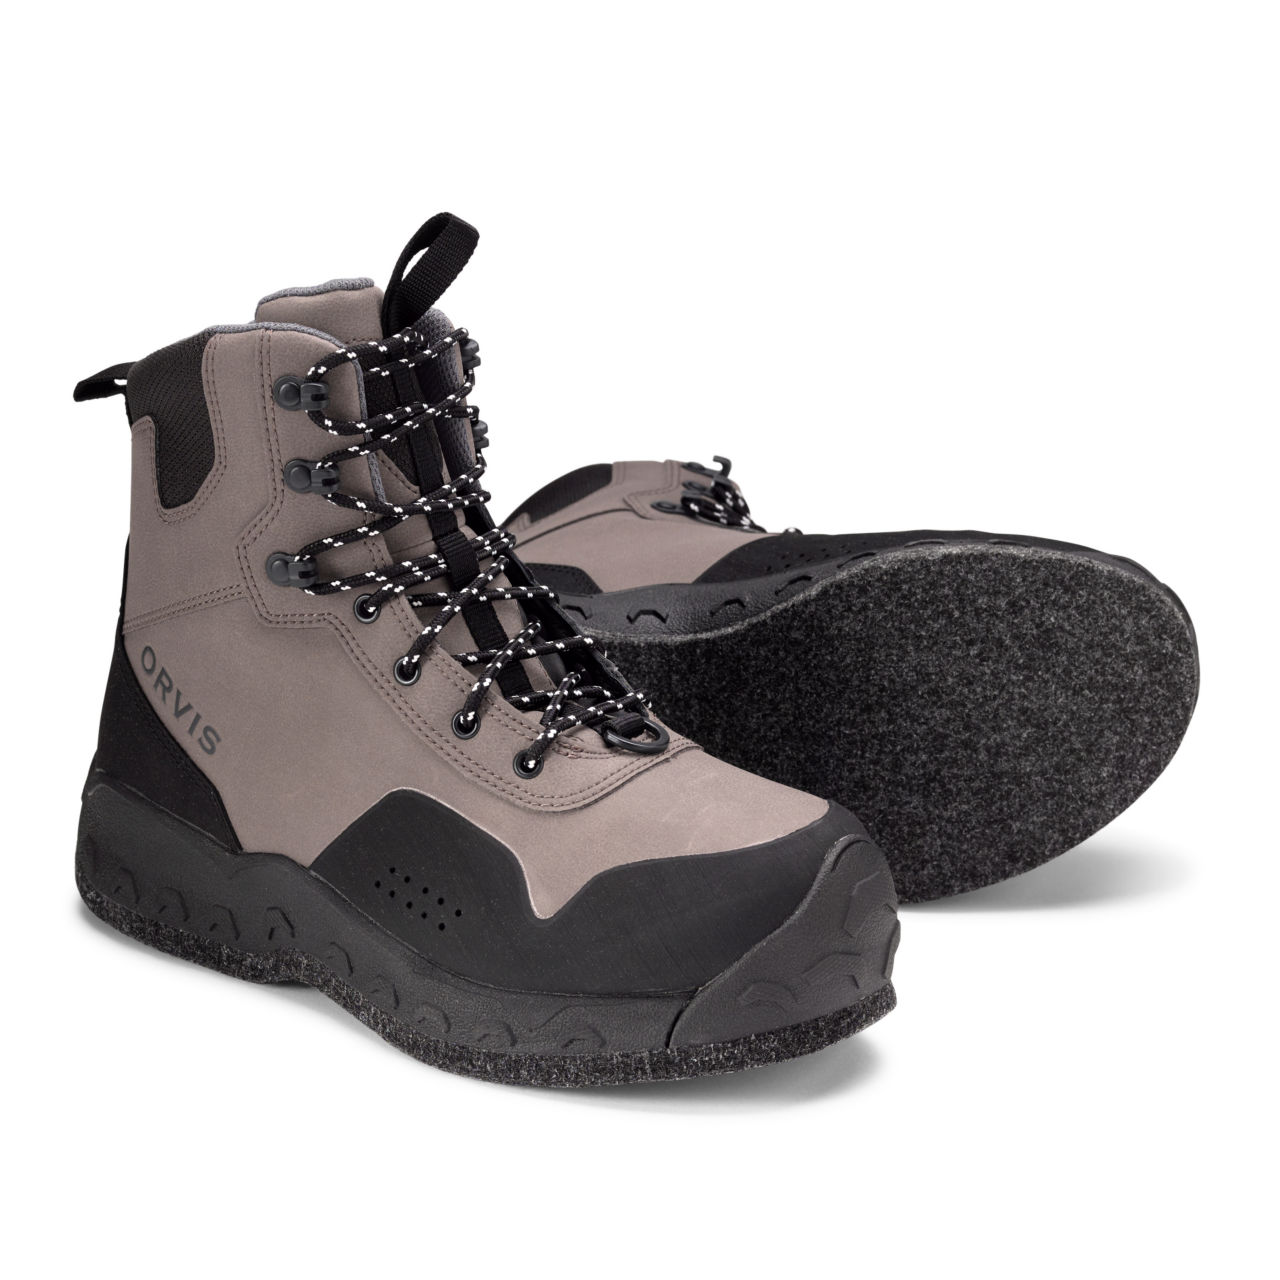 Women’s Clearwater Wading Boots - Felt Sole - GRAVEL image number 0